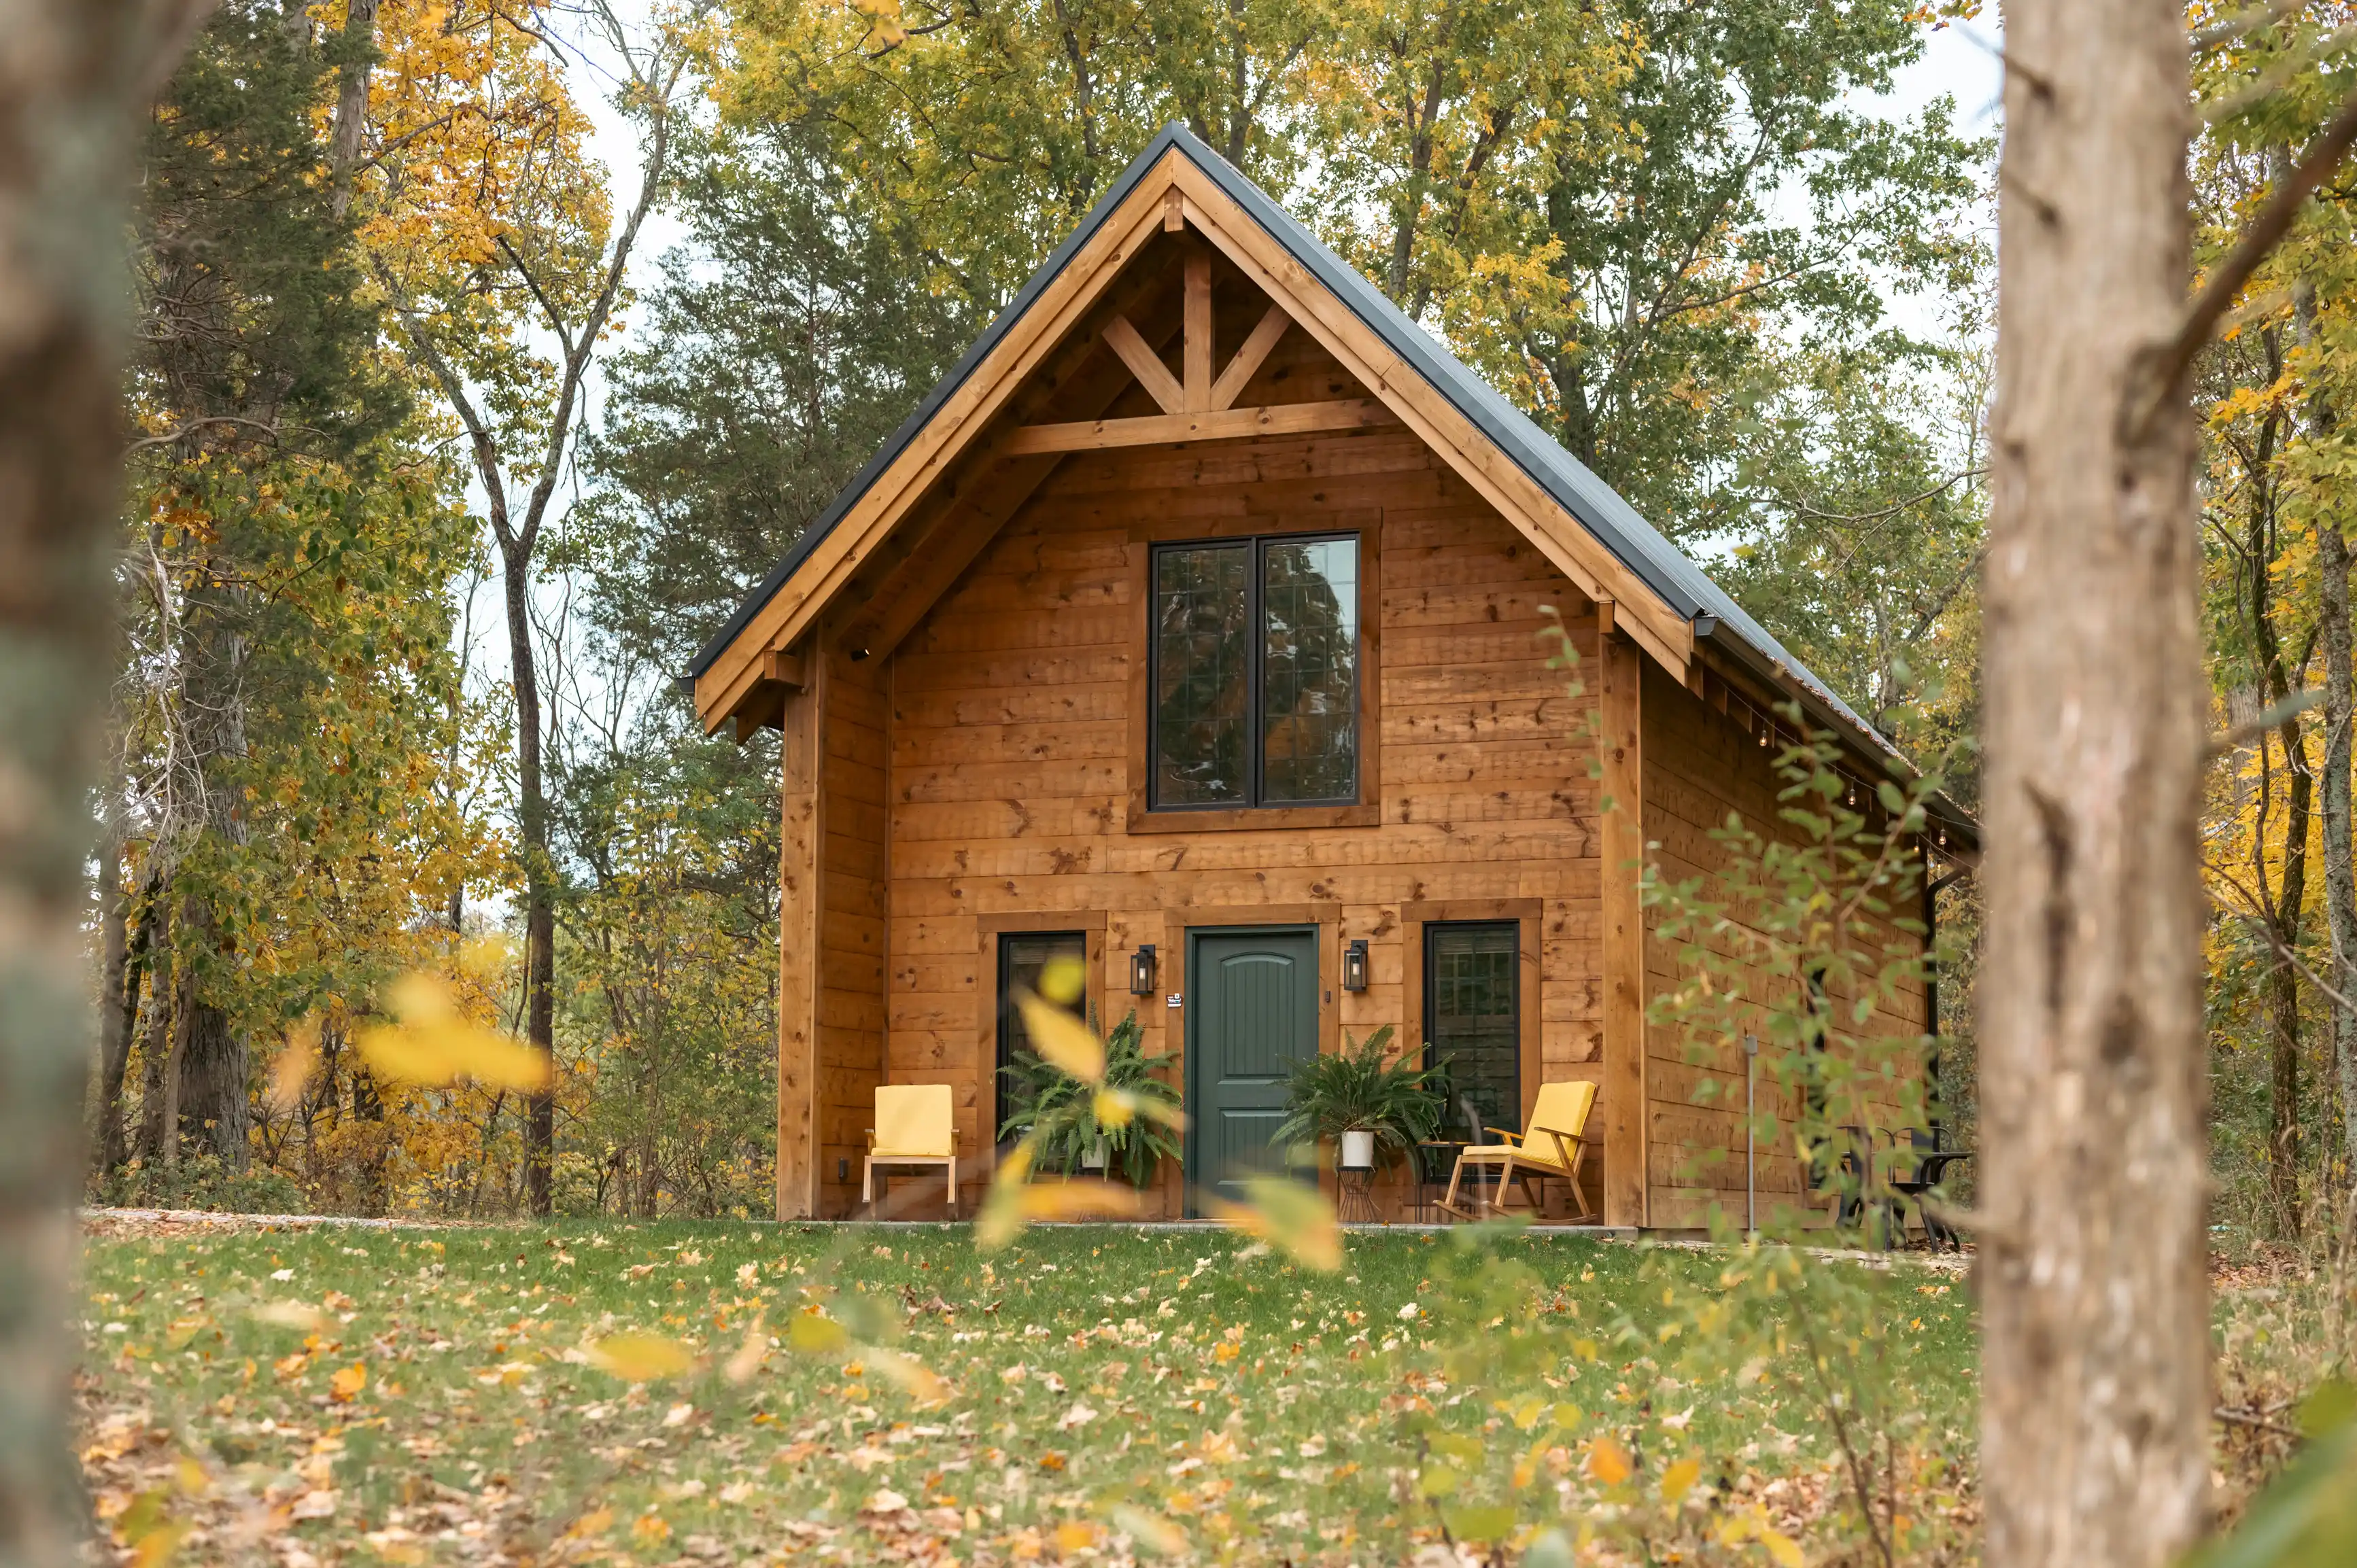 A wooden cabin with a green door nestled among autumn trees, featuring a gabled roof and large front window, with yellow chairs on the porch.